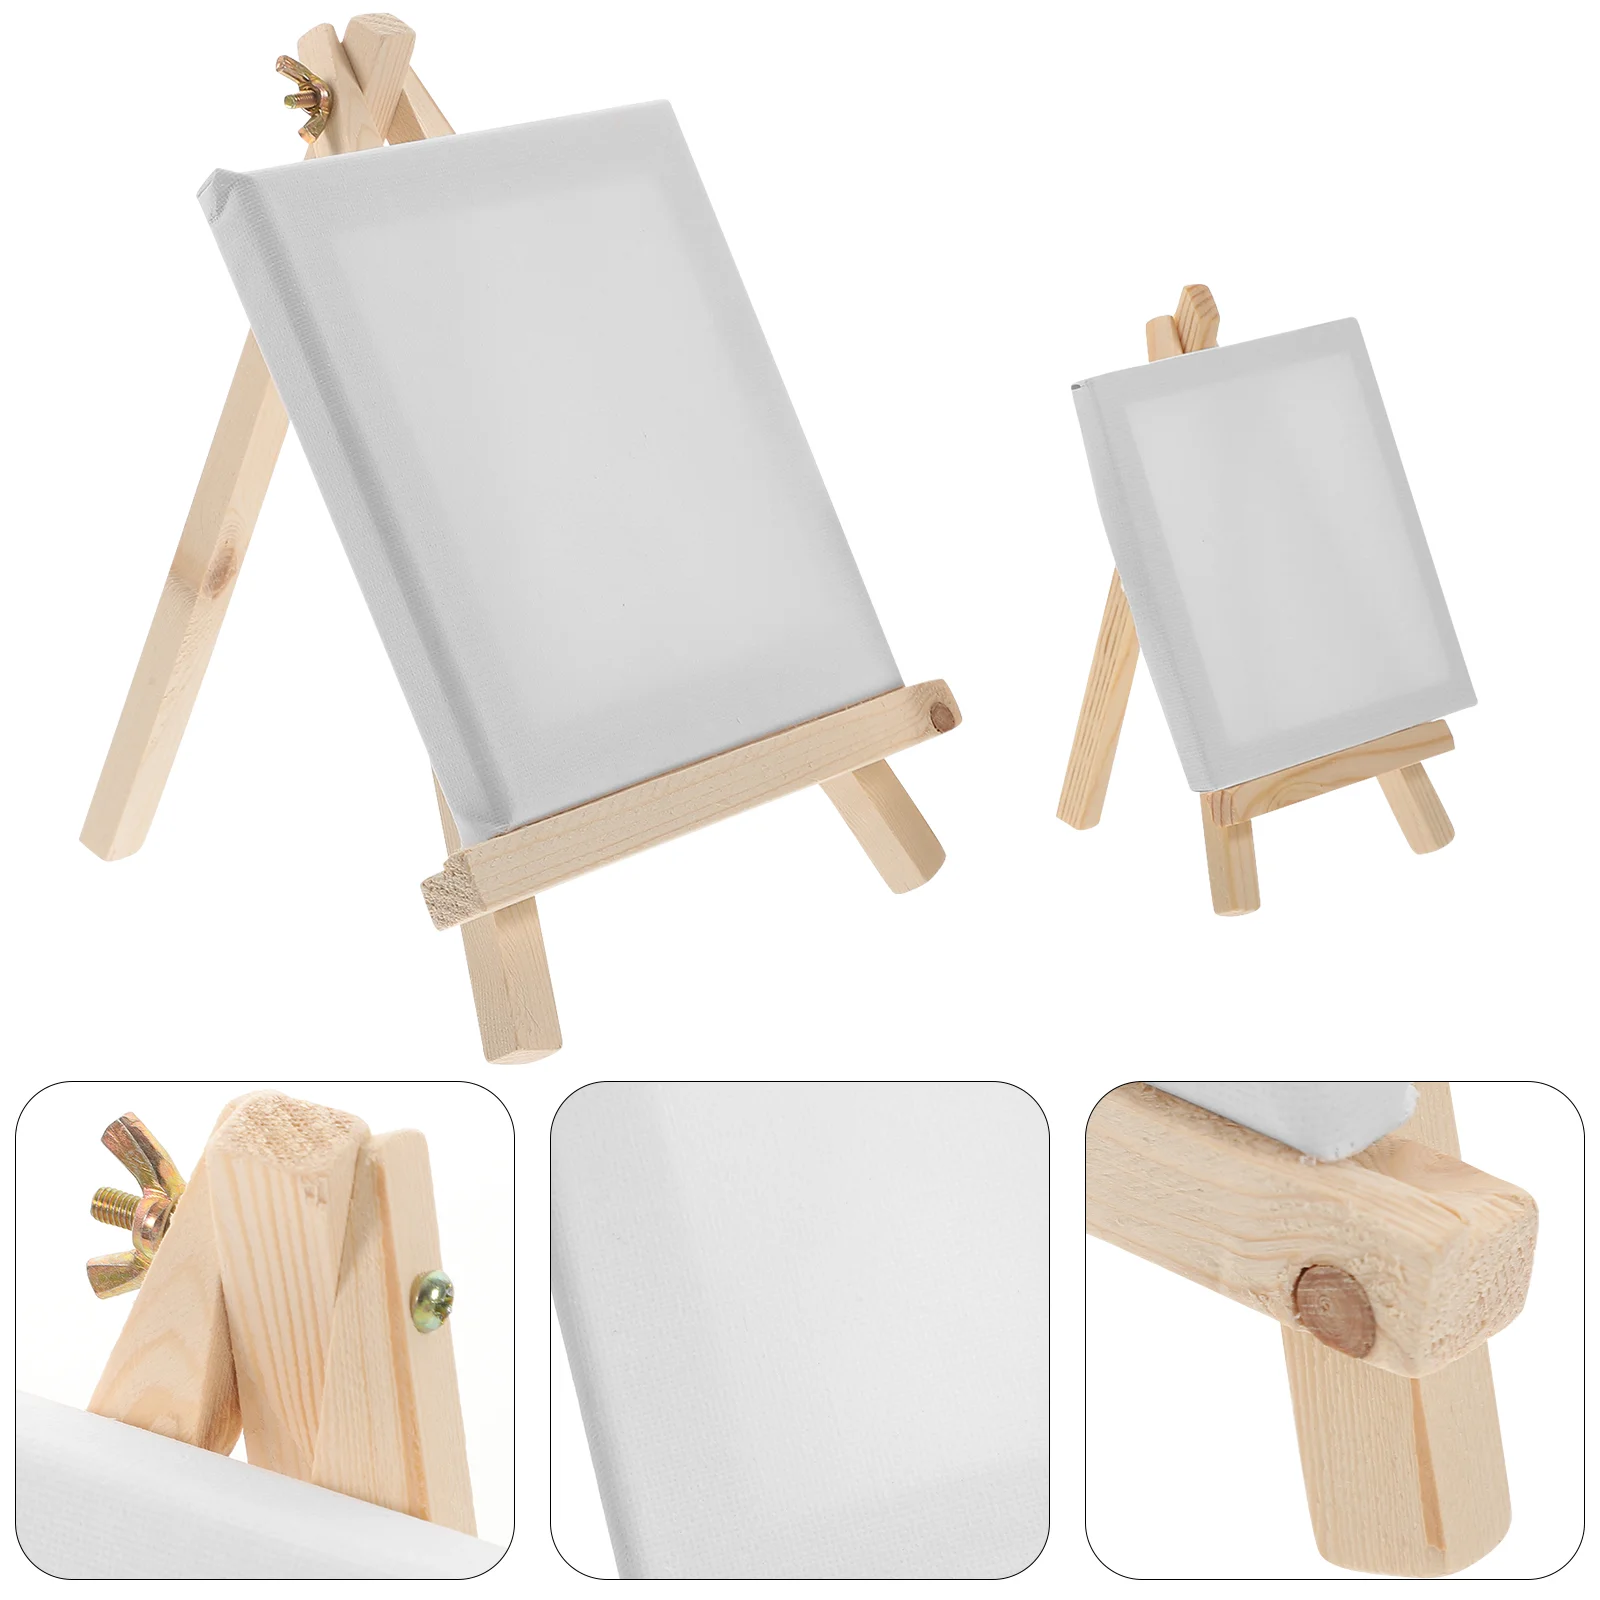 2PCs Canvas Easel Set White Blank Stretched Canvas with Wooden Easel Canvas Panel Boards for Artist Painting Business Wedding 24pcs artist blending stump and tortillion art blenders set with with 4pcs sandpaper 2pcs pencil extender for student sketching